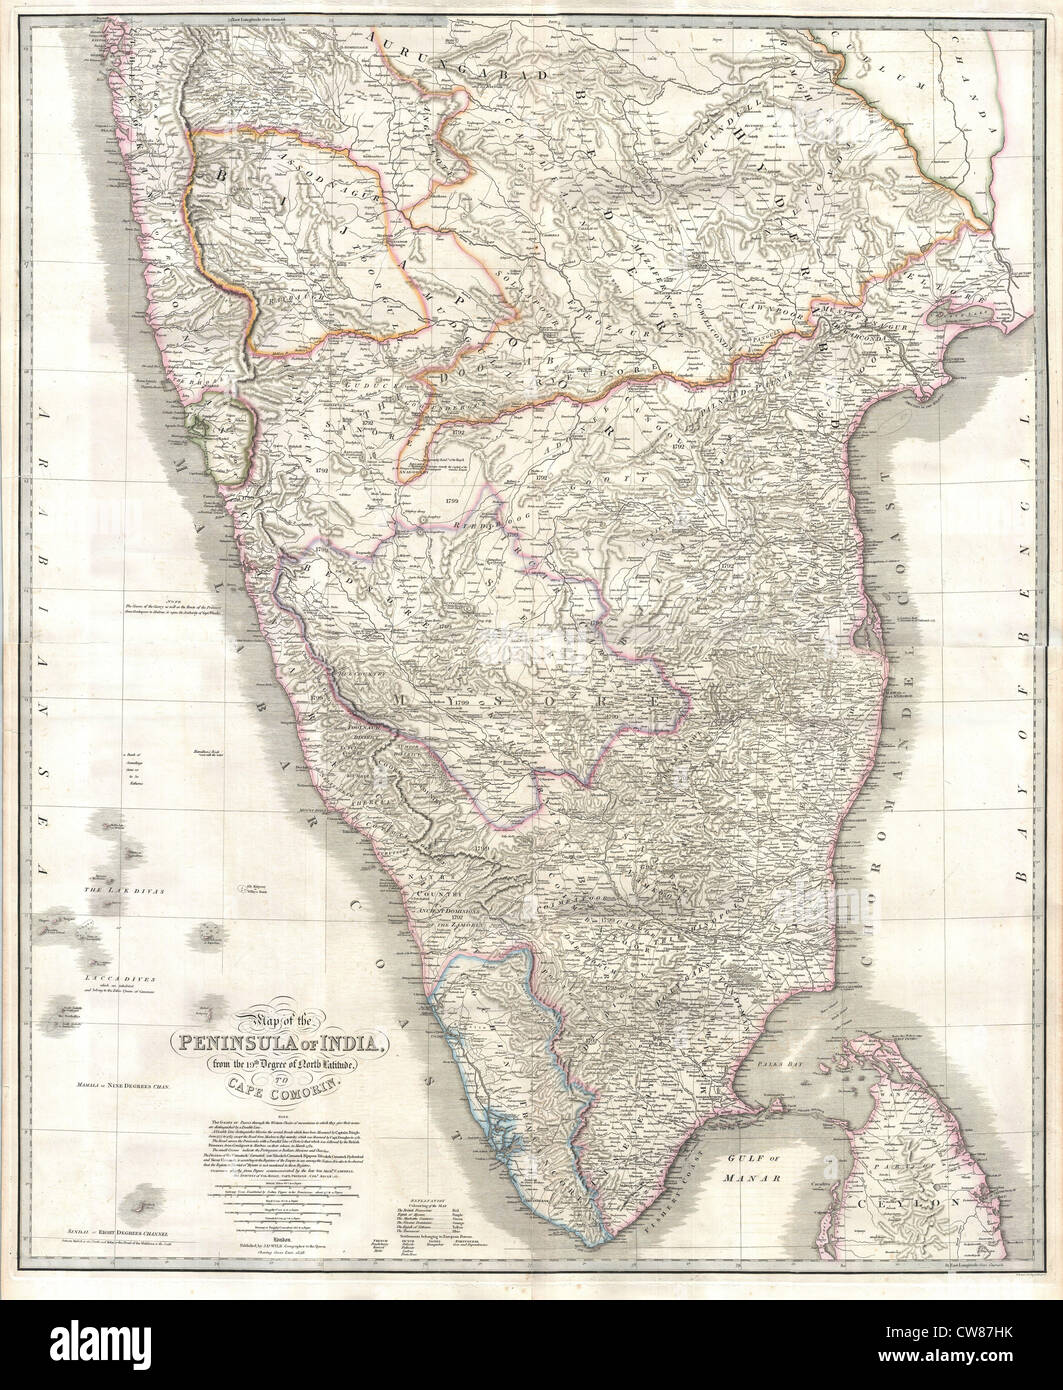 1838 Wyld Wall Map of India (Hindostan or British India) Stock Photo